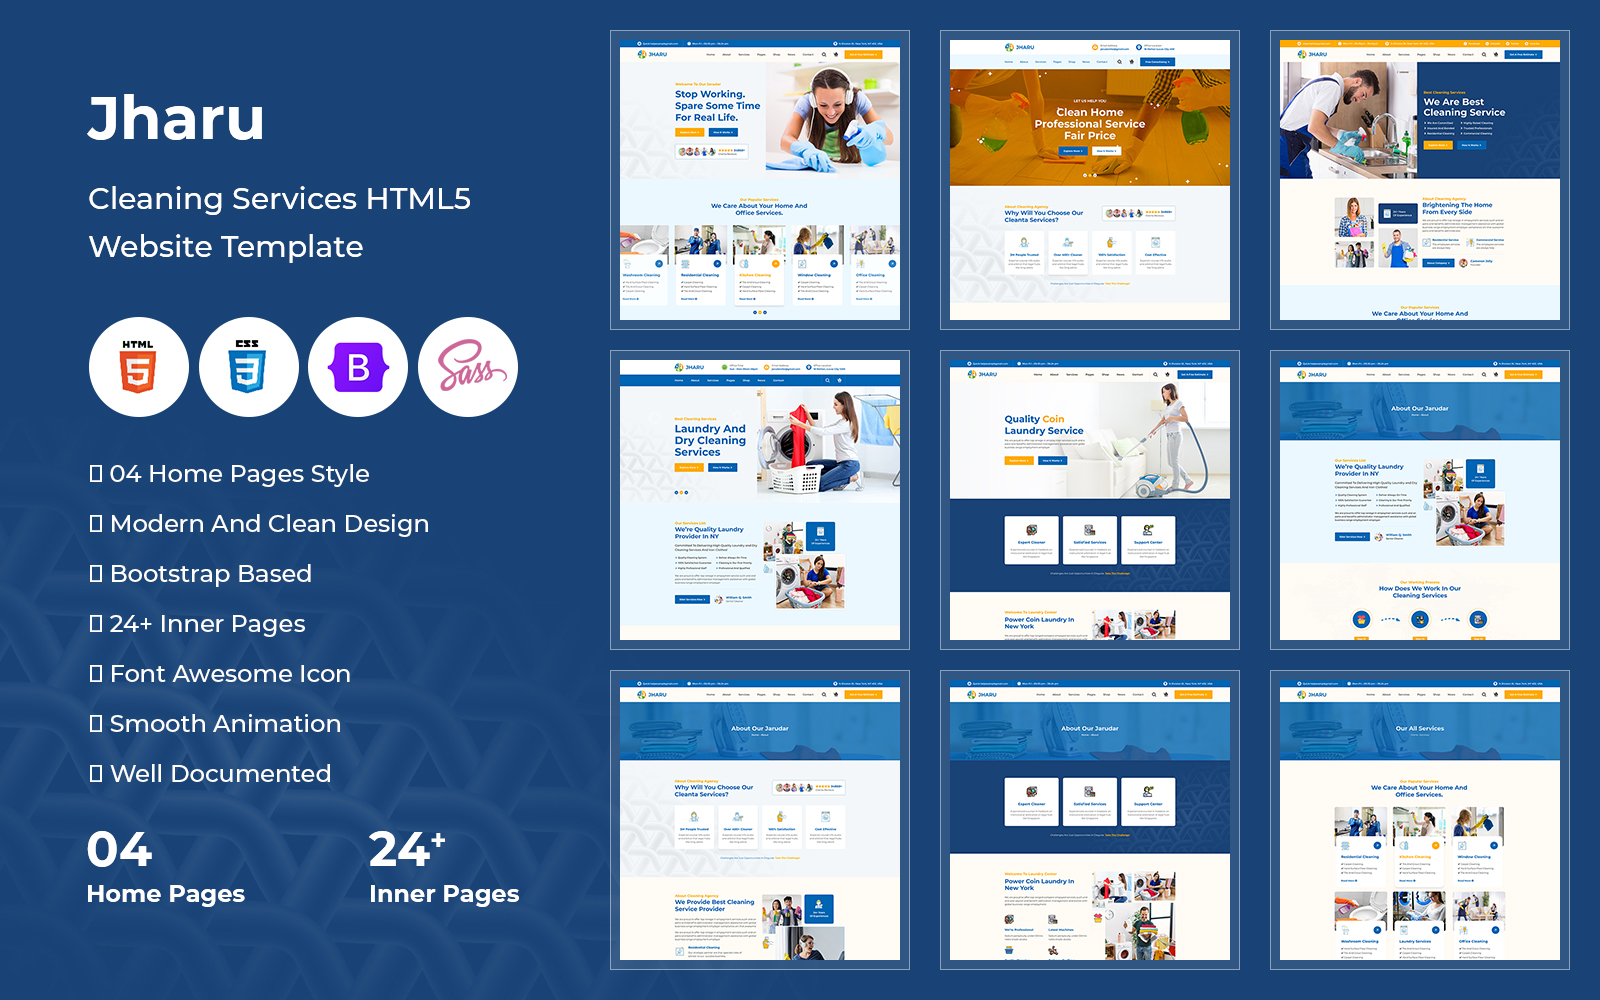 Jharu - Cleaning Services HTML5 Website Template